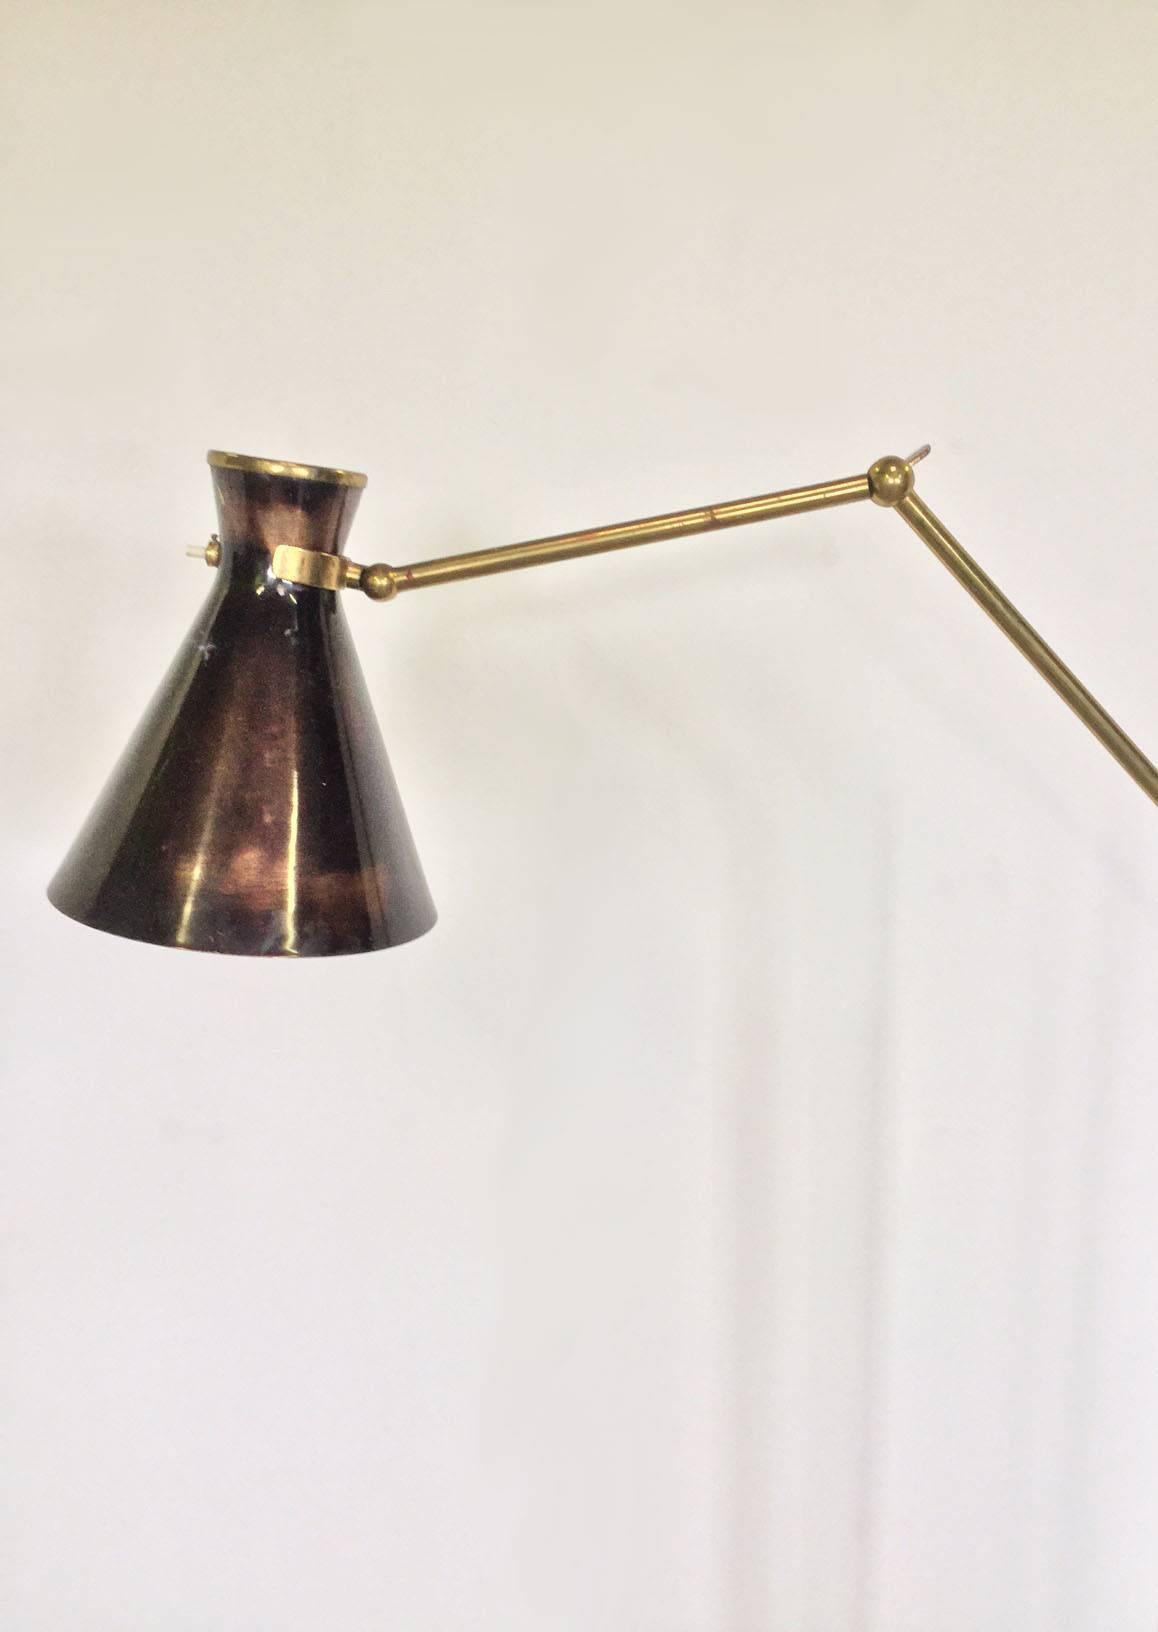 Beautiful floor lamp commissioned by Gio Ponti for Parco die Principi Hotel in Sorrento, manufactured by Fontana Arte in 1950.
Brass and glass base with adjustable brass stem, the diffuser is a double cone black lacquered joint to the structure by